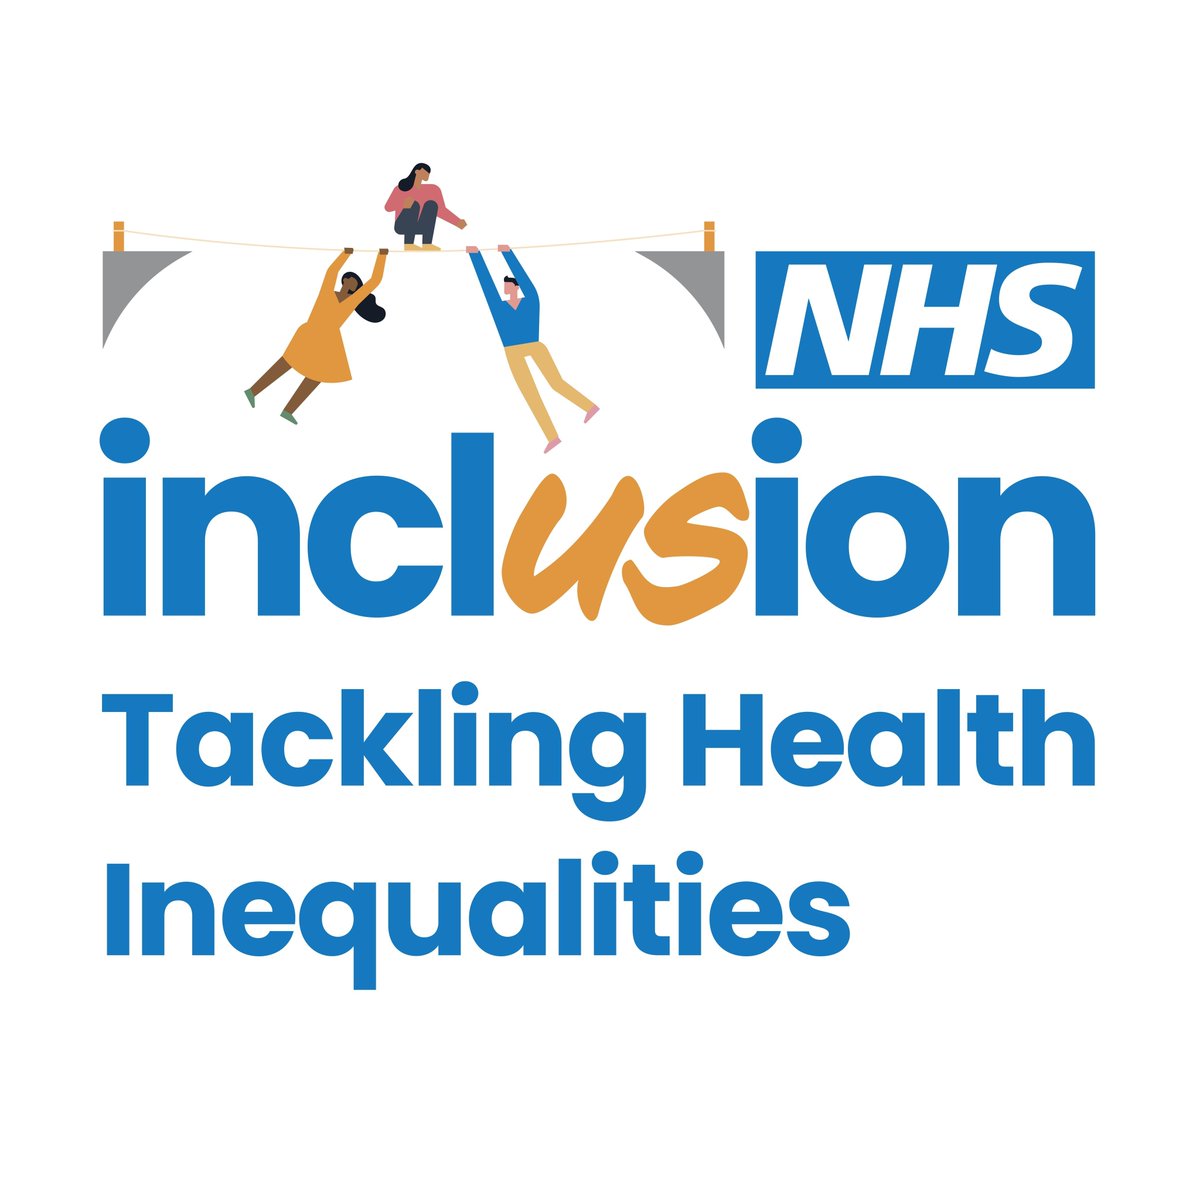 It was our pleasure to focus on #HepC elimination today with our partners @Inclusion_NHS in their #tacklinghealthinequalities network #HepCULater #BeFreeOfHepC @DeanneBurch10